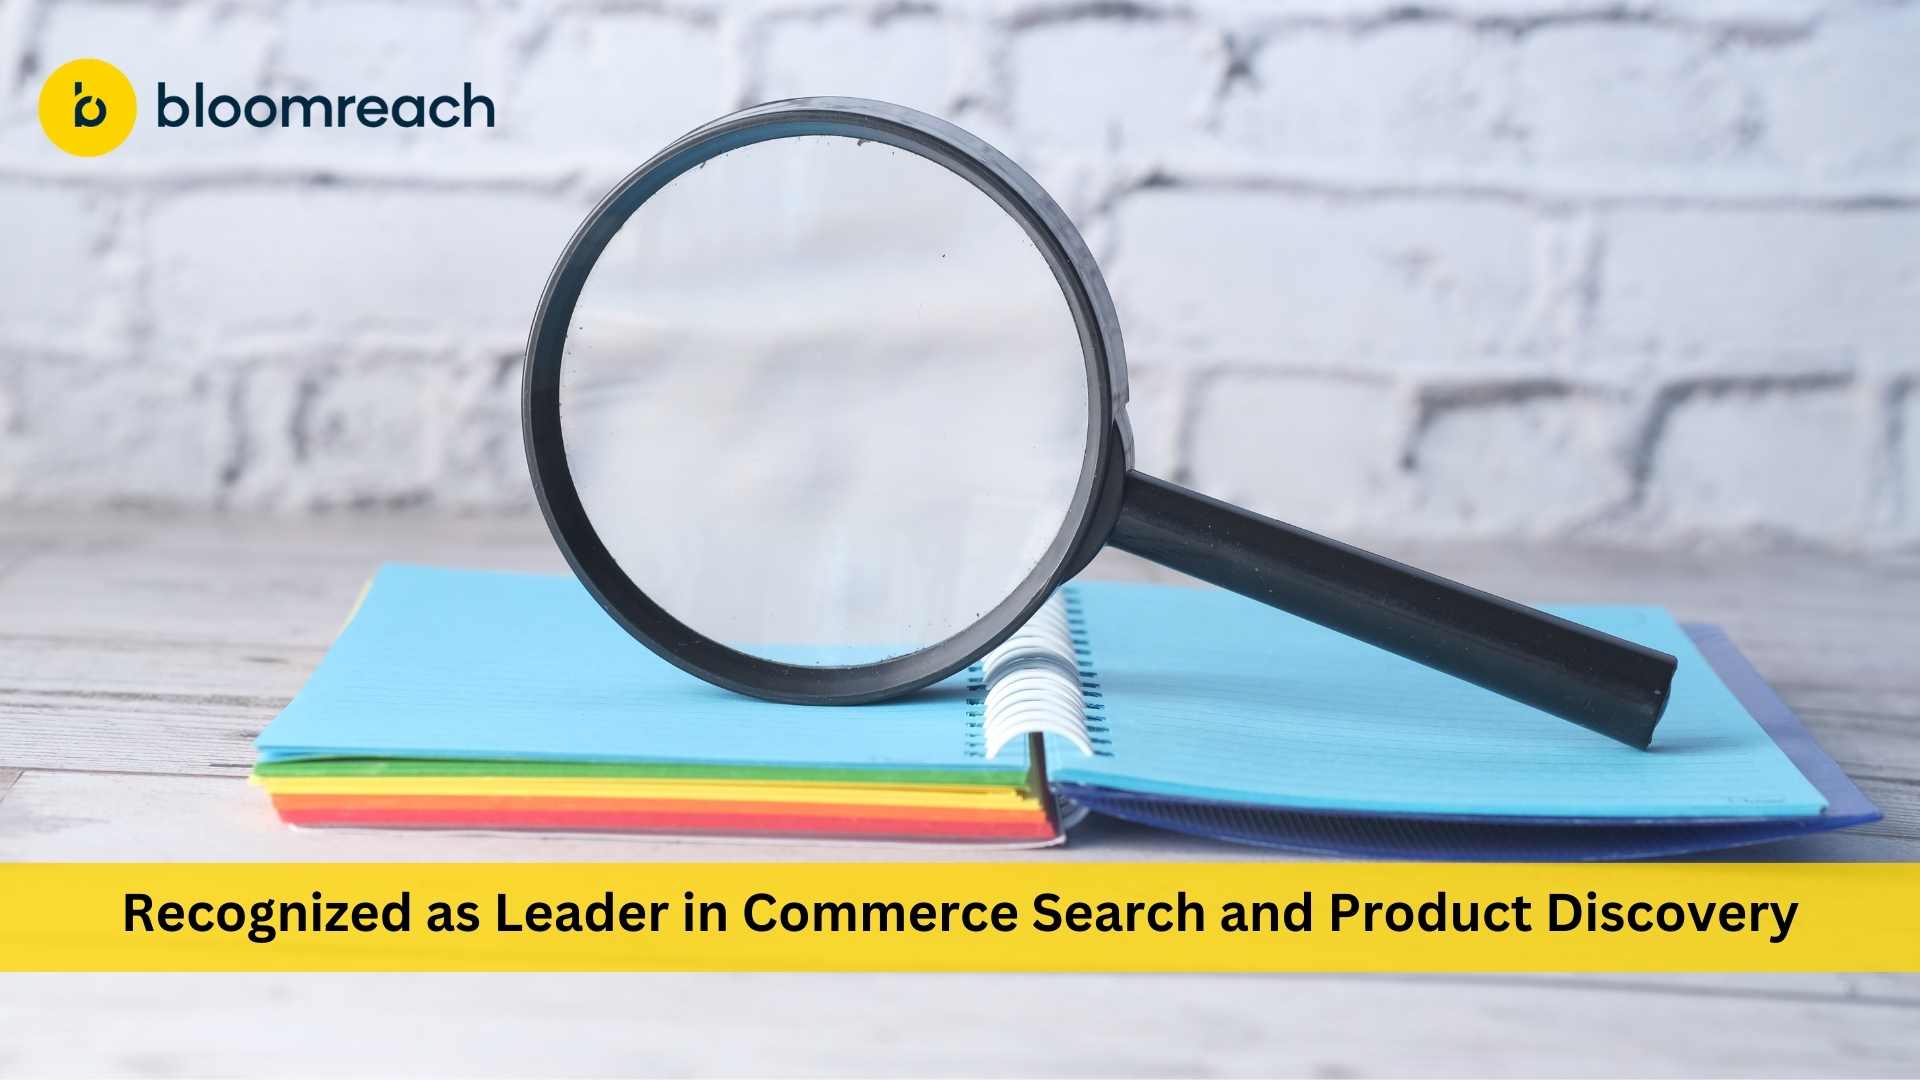 Bloomreach Recognized as Leader in Commerce Search and Product Discovery by Independent Research Firm